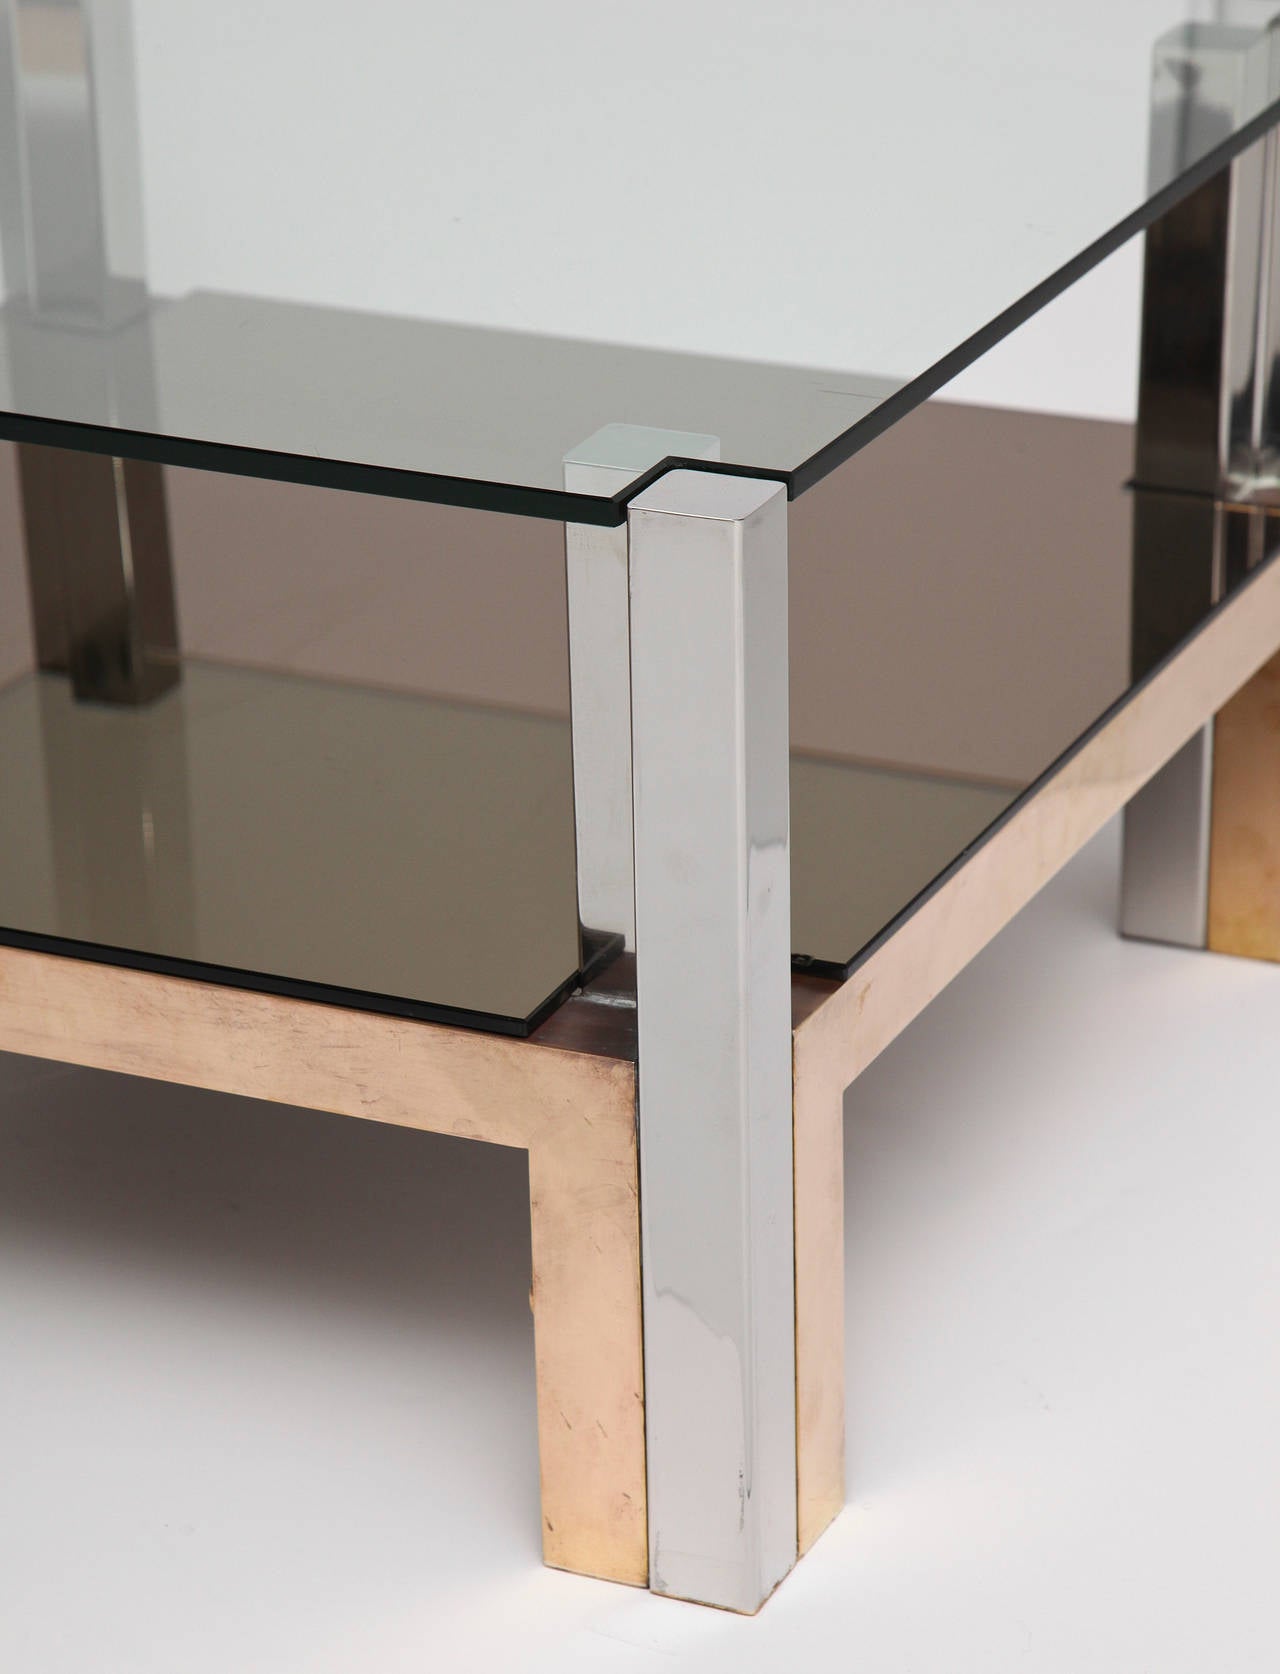 Italian Pair of Chrome and Glass Coffee Tables by Nucci Valsecchi